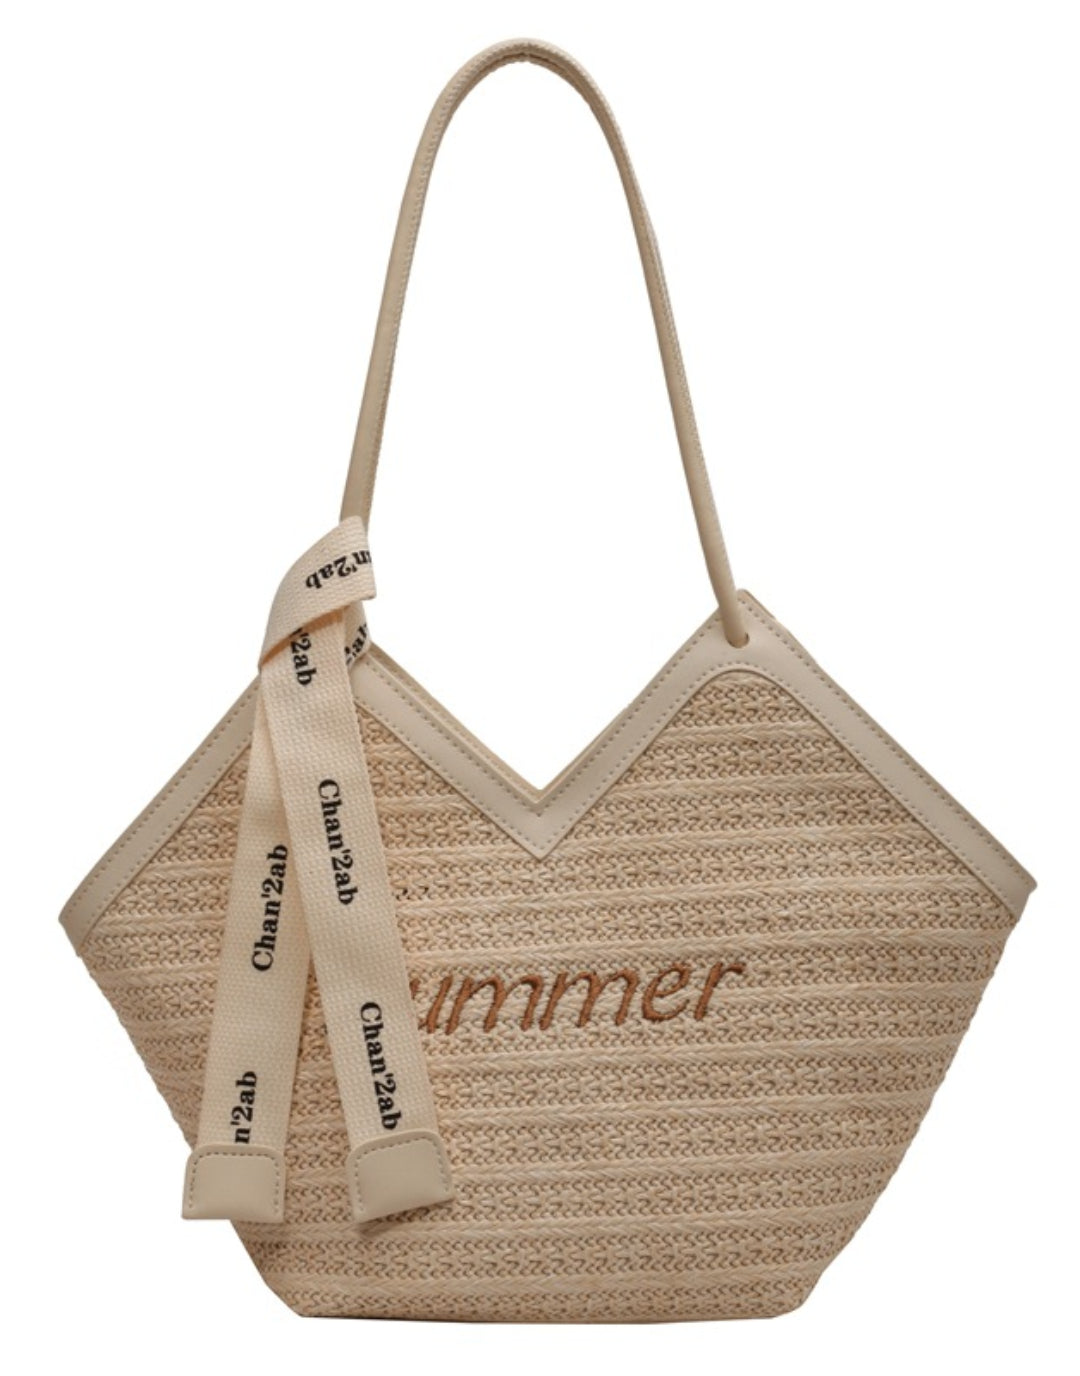 Straw Beach Bags&Tote Embroidery Heart Design Bag